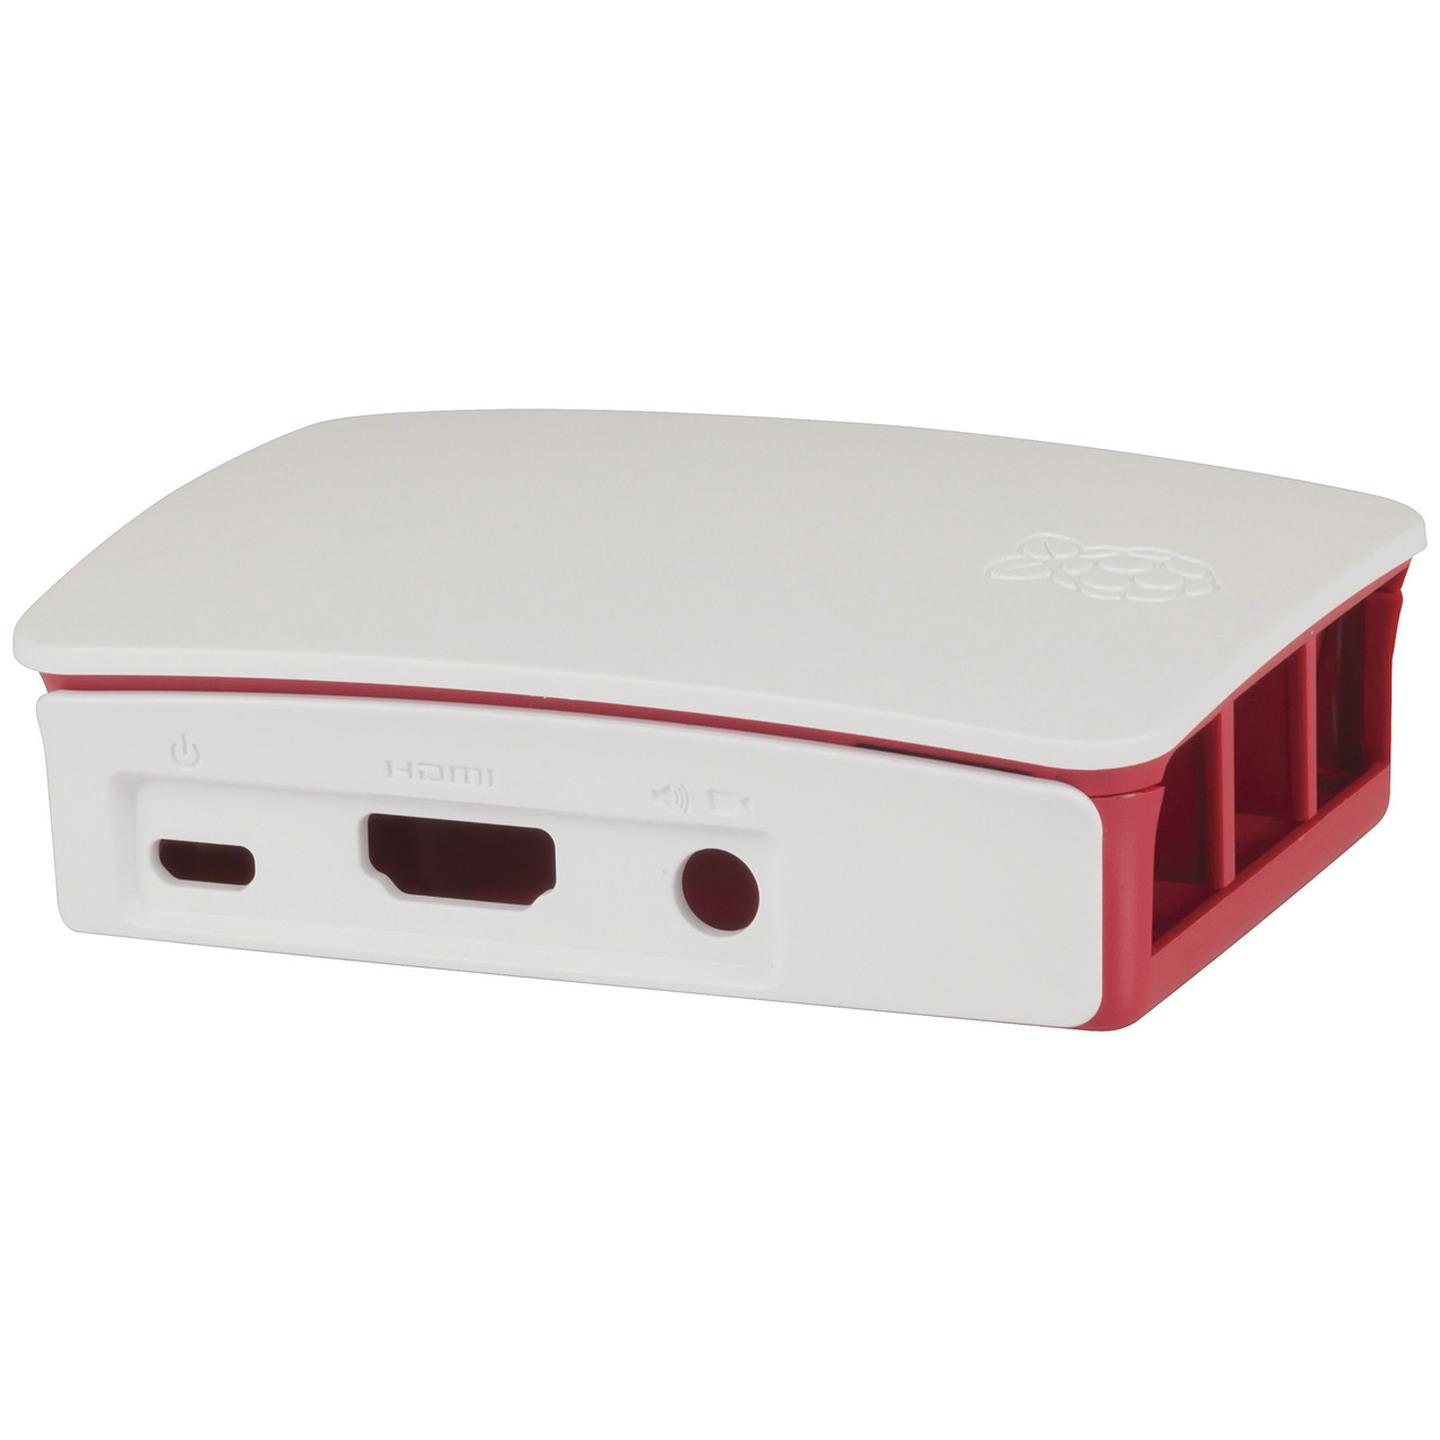 Official Raspberry Pi 3B Case Red and White